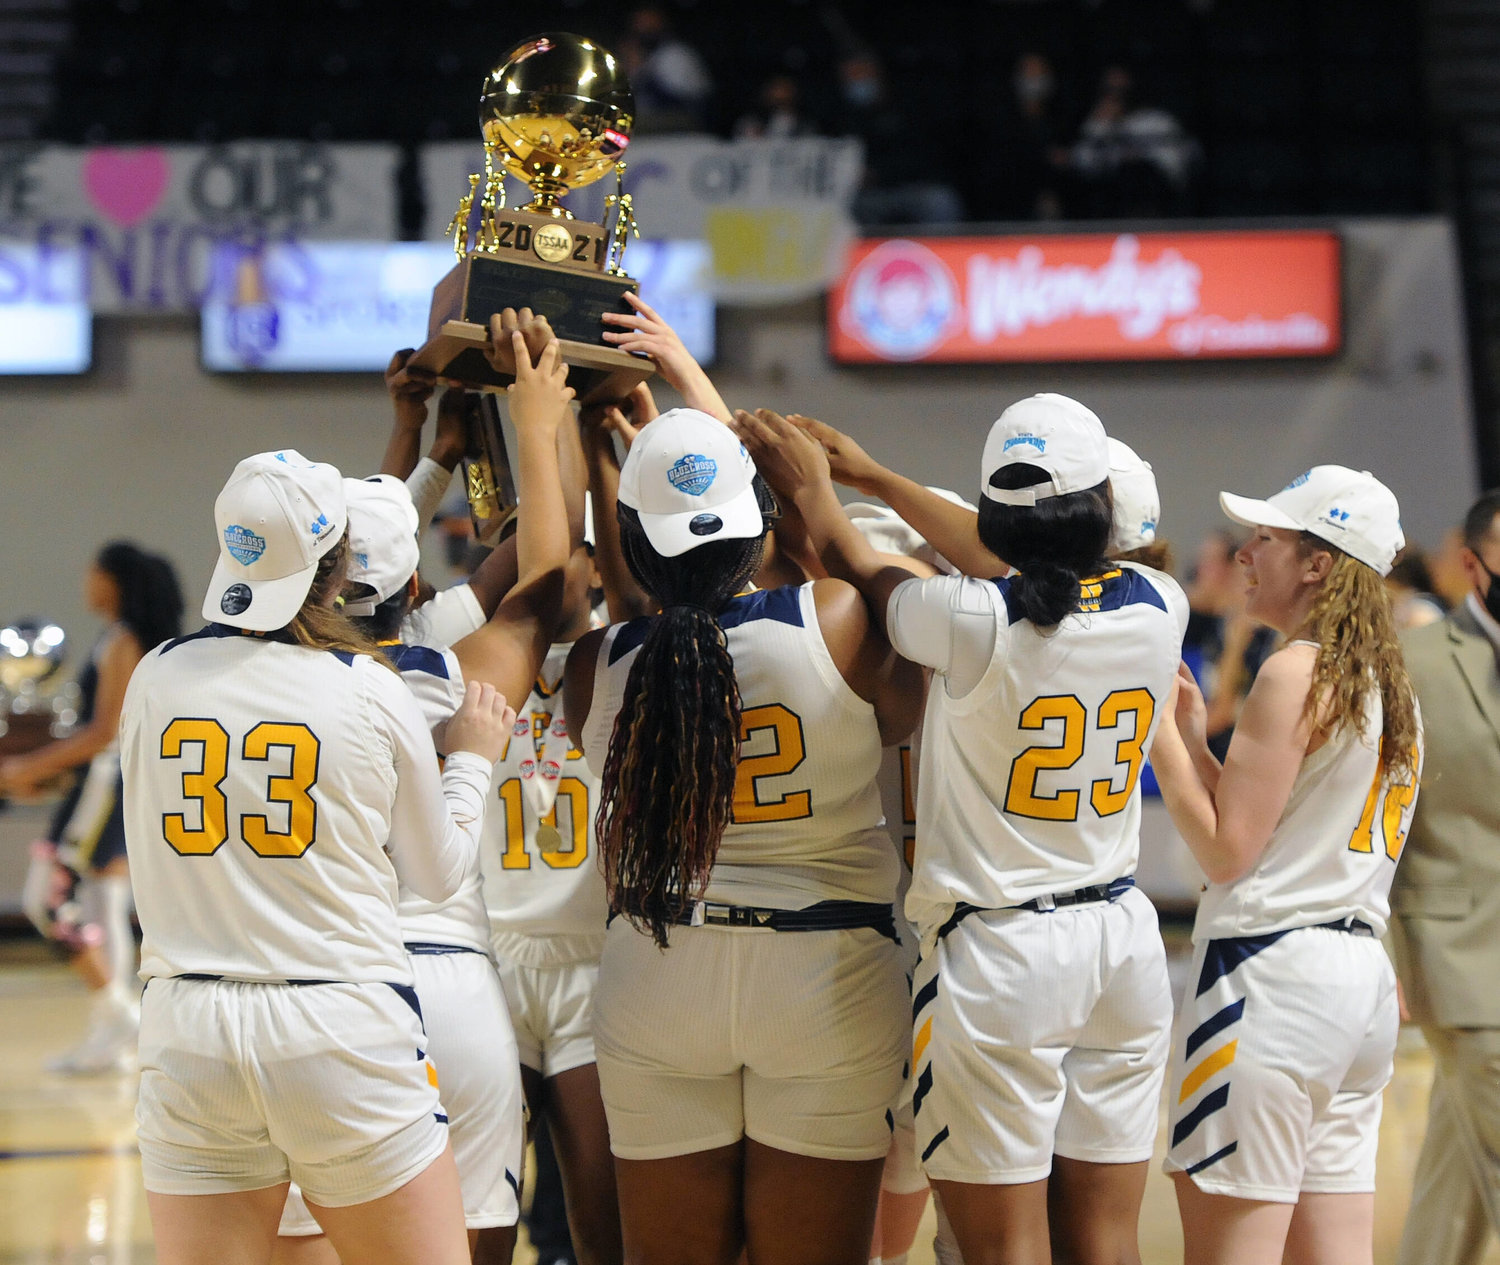 The Webb Lady Feet hoist their state championship trophy after defeating PCA on the campus of Tennessee Tech earlier this season.